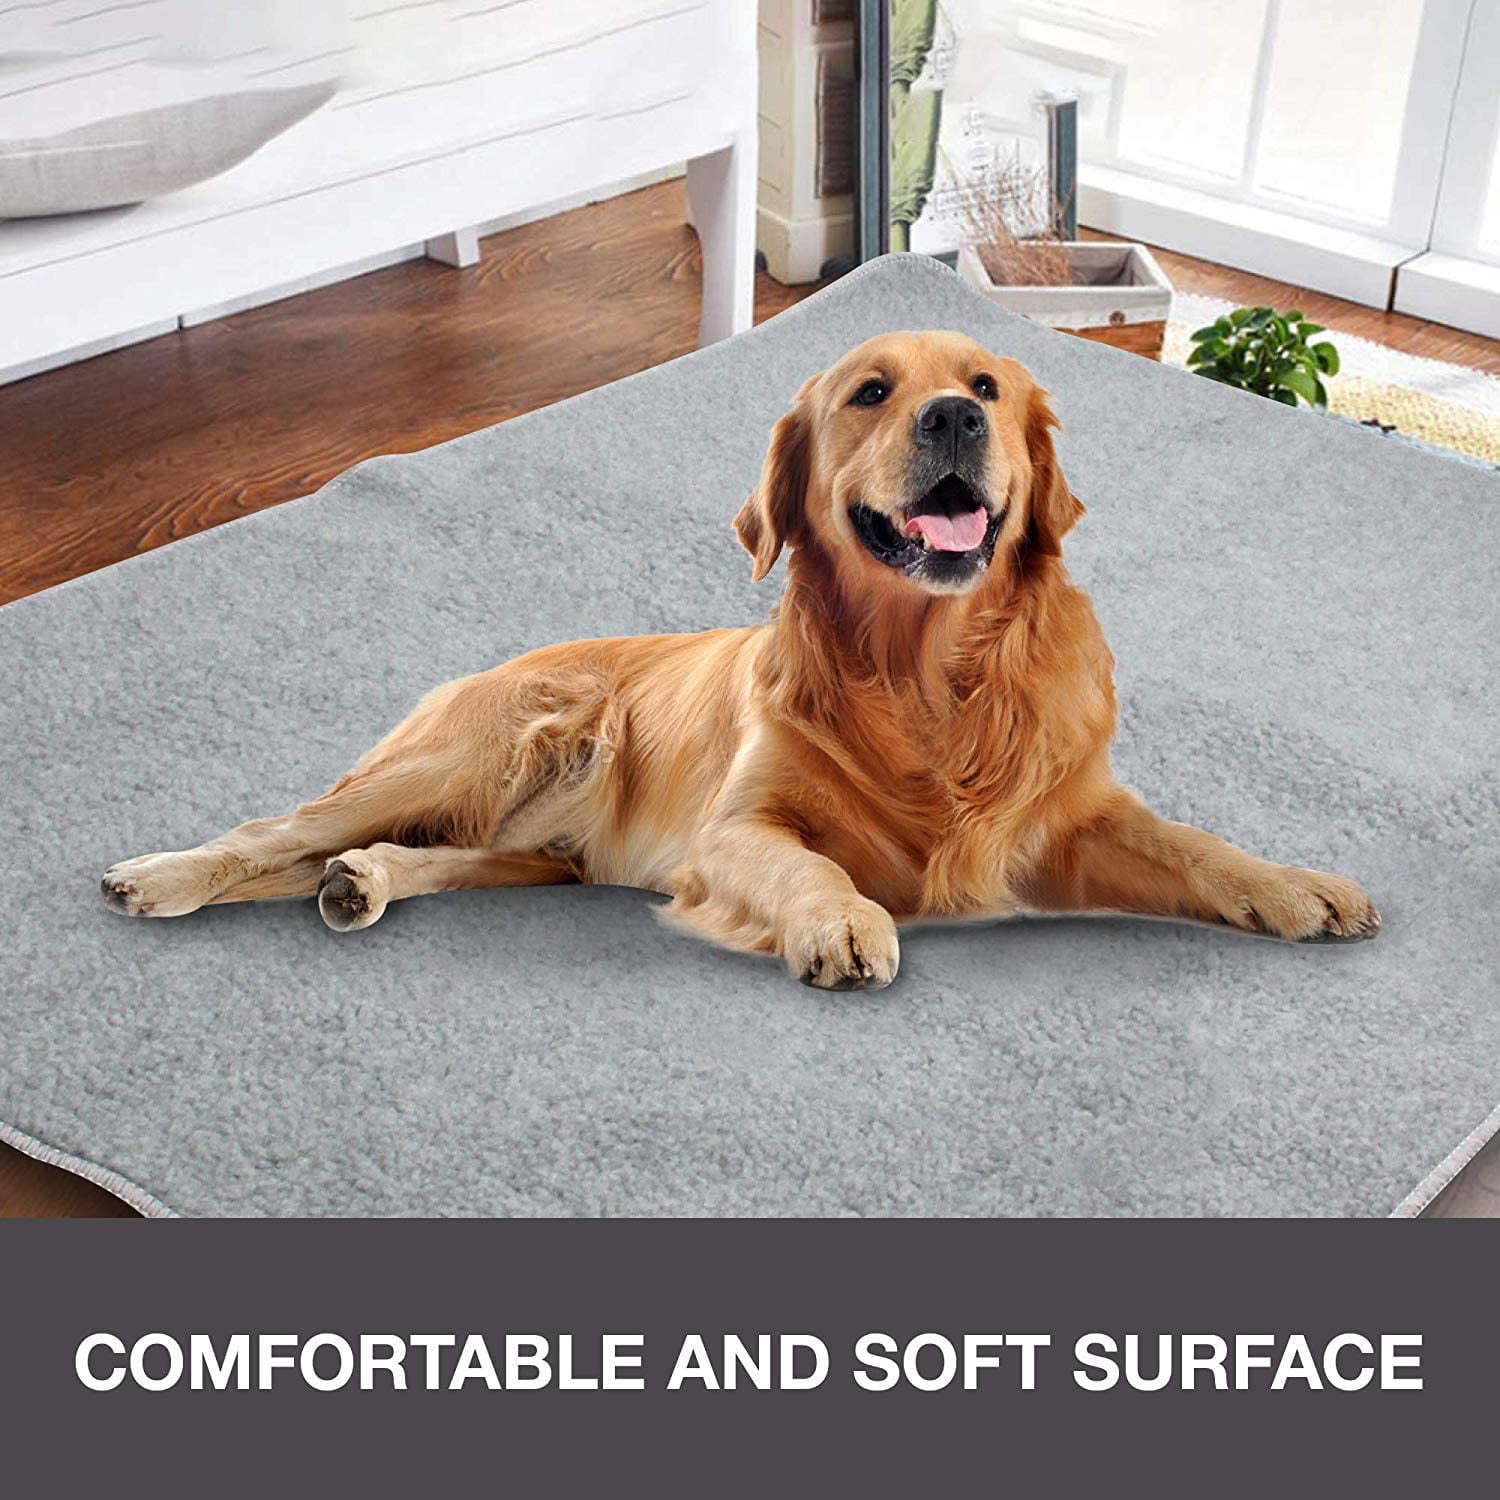 Dog Trunk Fleece Mat Pet Reusable Kennel Pad & Bed Mat for Dog Cat Waterproof Kennel Pad Pet Furniture Protection Pad 47.2 in x 31.5 in/29.5 in x 19.7 in 